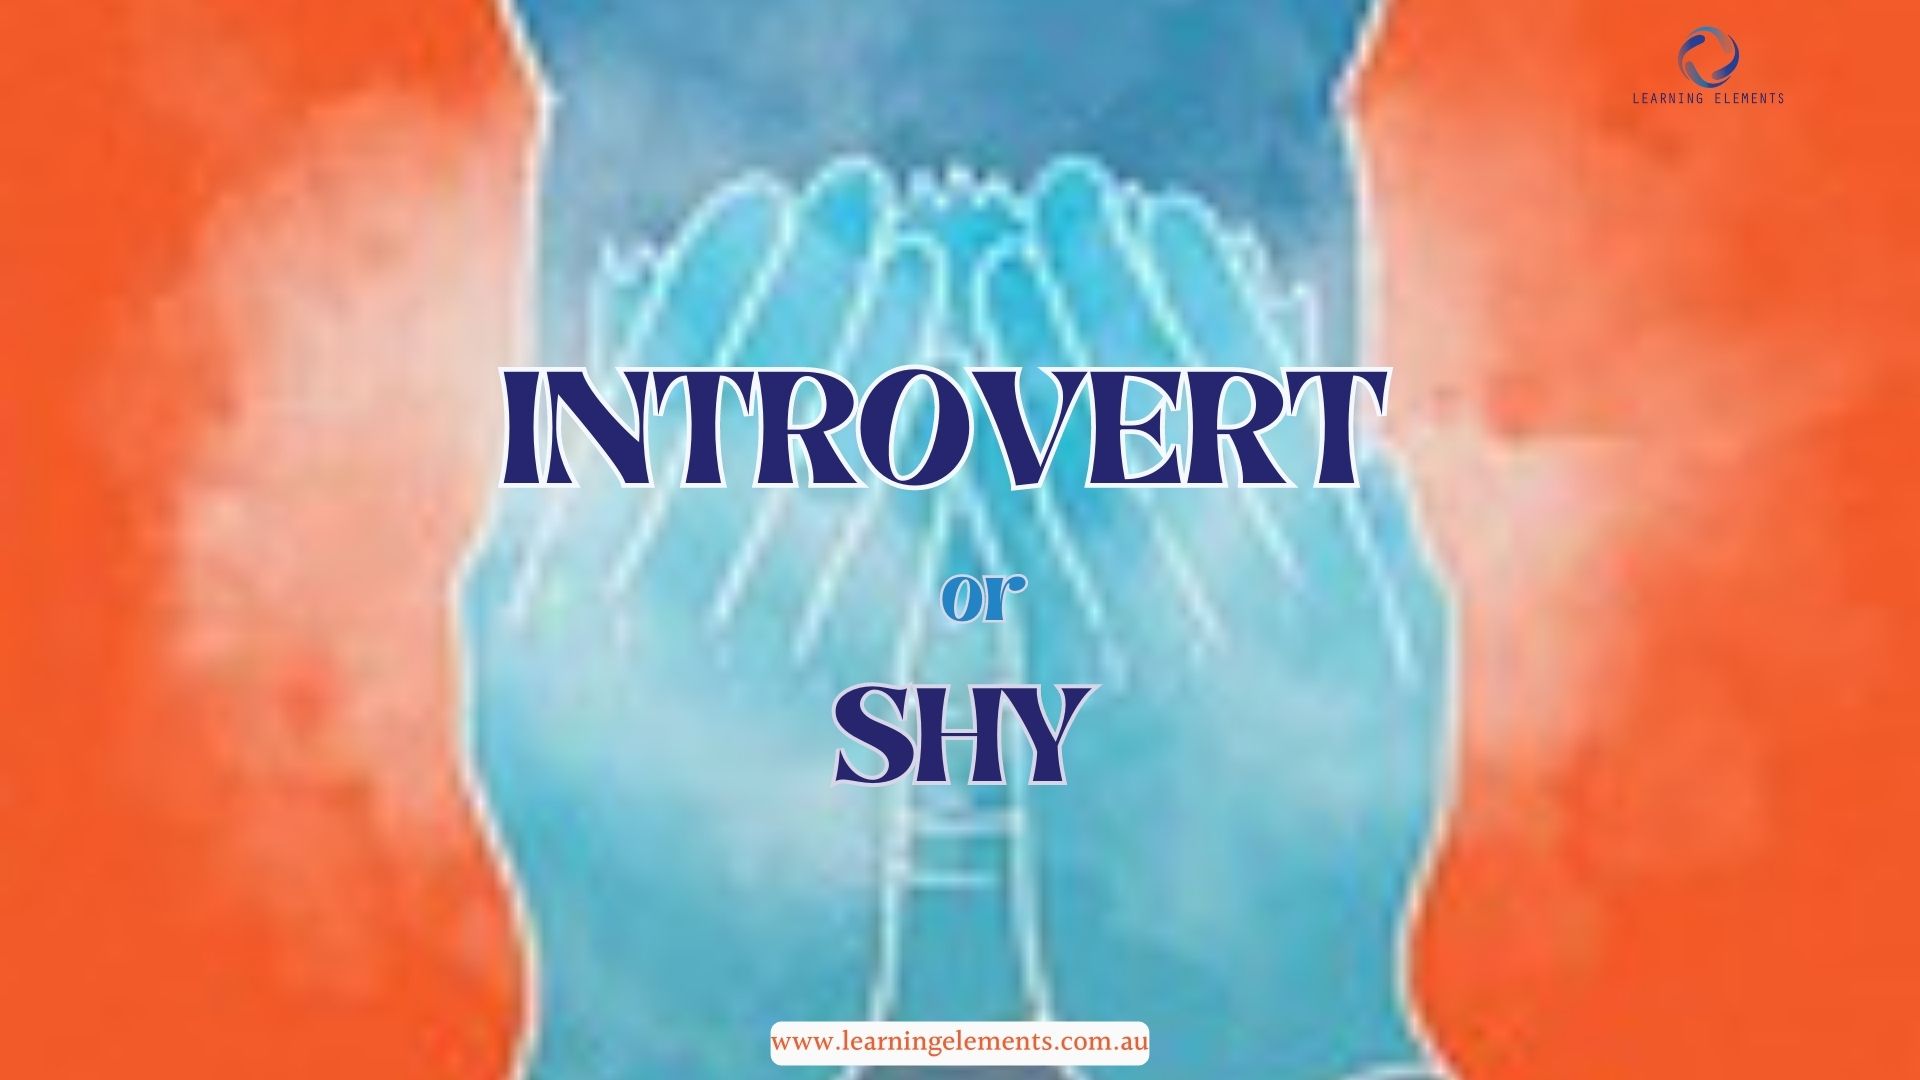 Introversion vs. Shyness vs. Social Anxiety - What's the Difference